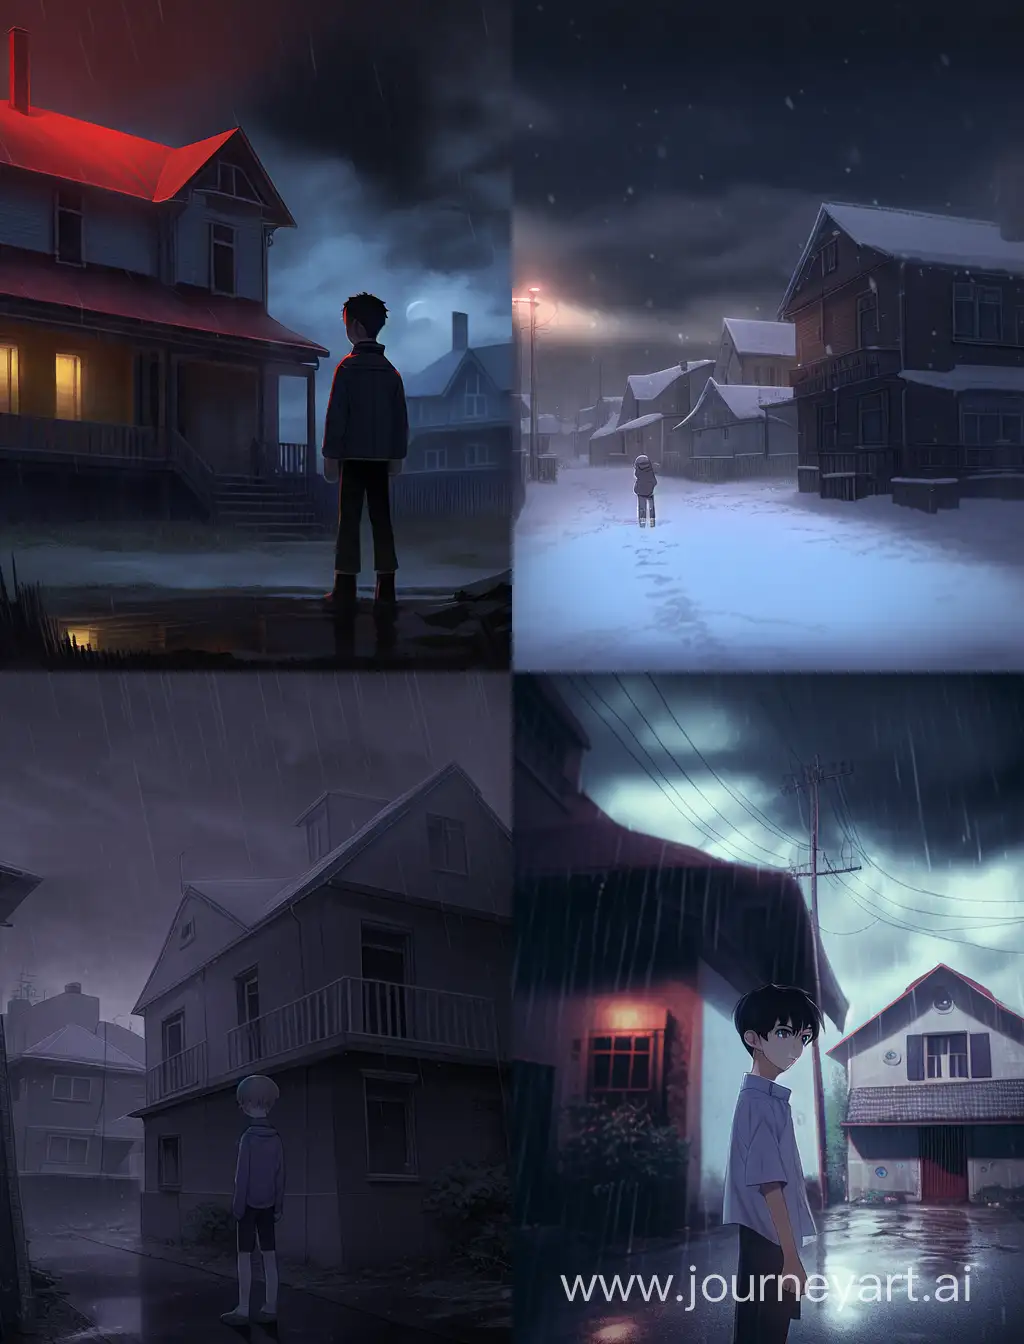 the boy 12 years old, anime style, on the left and right are Russian gigh houses like in the Soviet Union, standing back, anime, very dark sky, high-detailed, rain and snow, sad atmosphere.